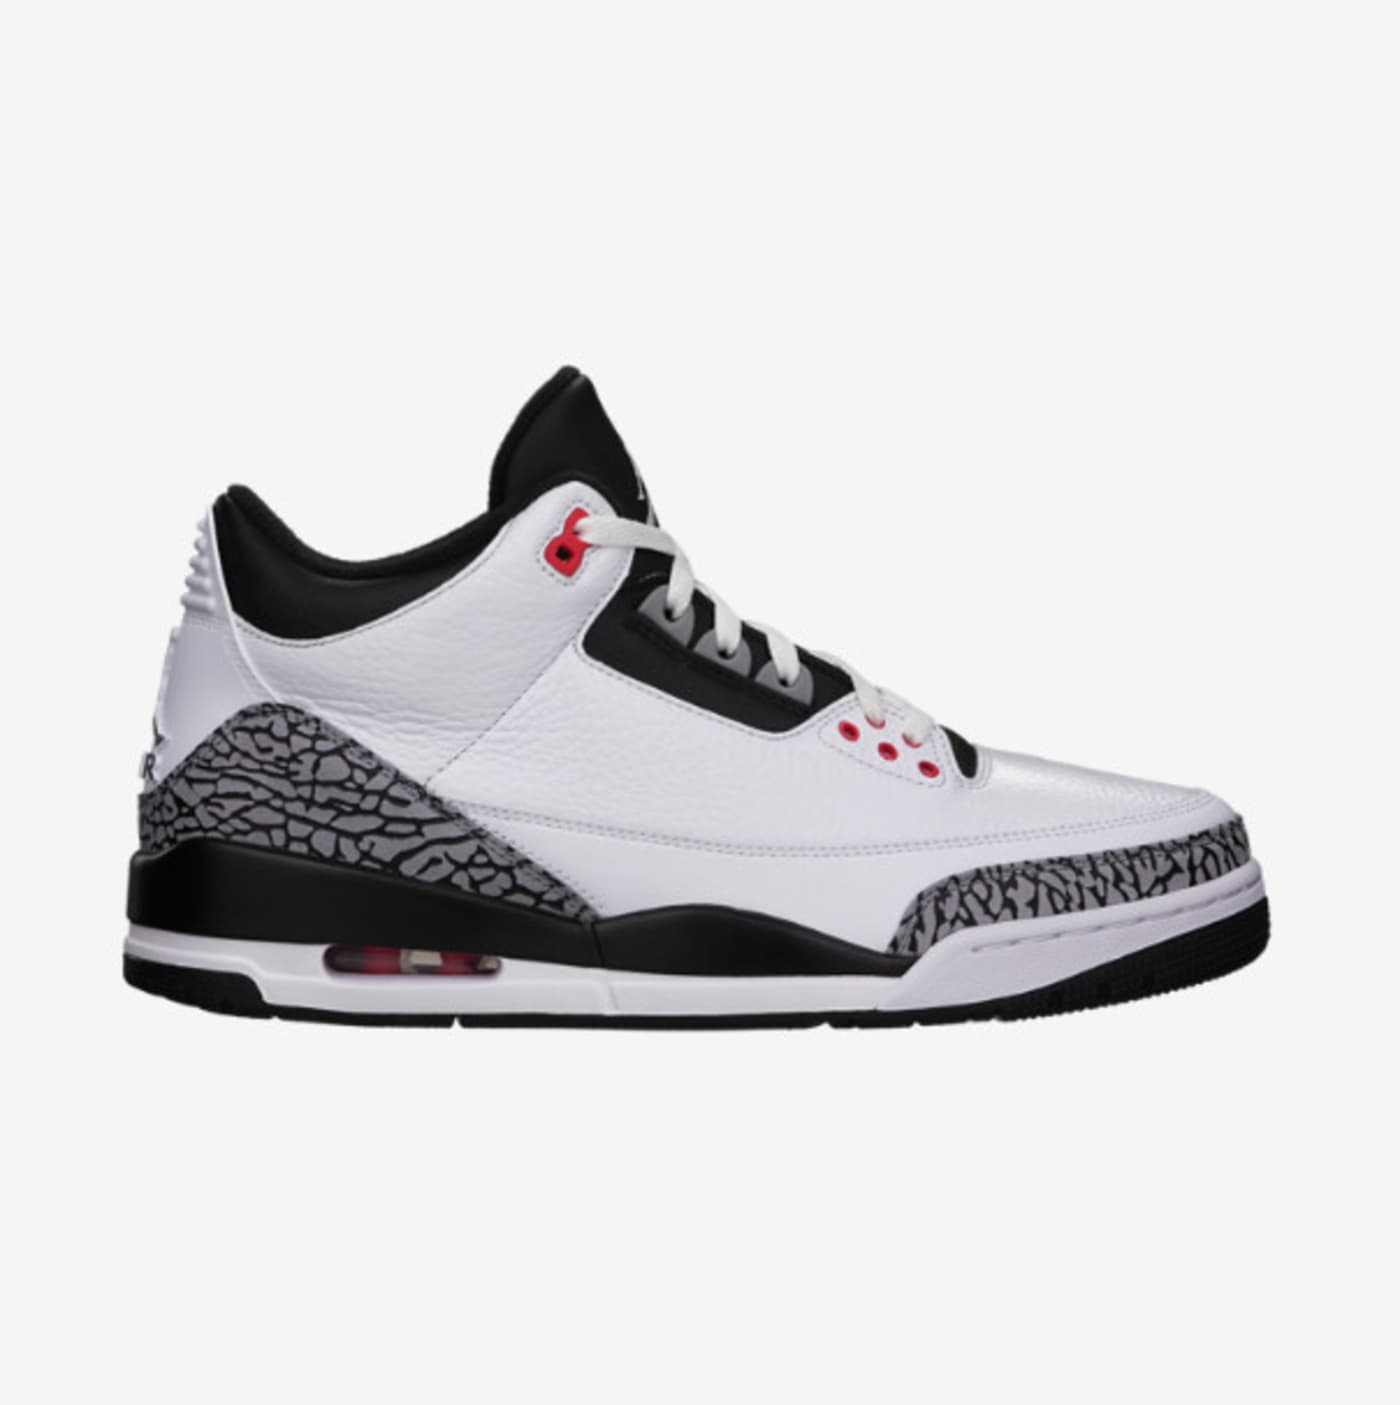 The Air Jordan III “Infrared23” Restocked on Nike Store and Is Still ...